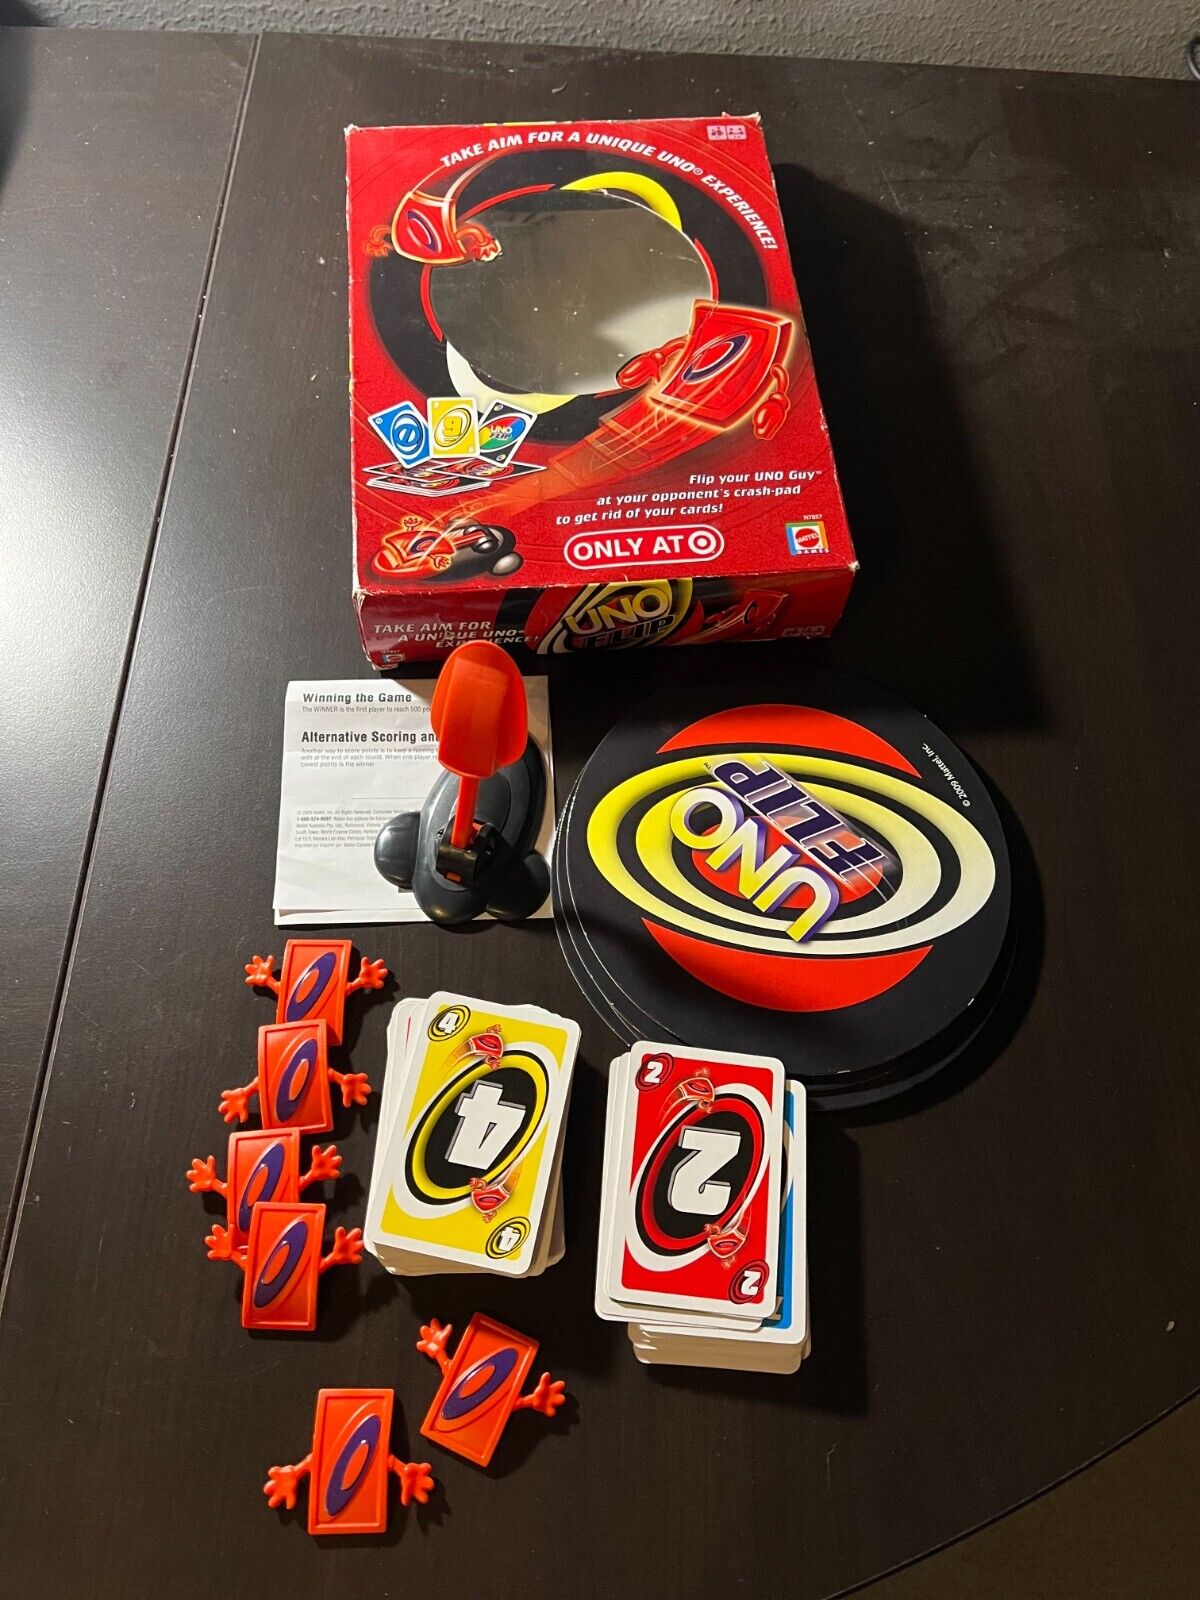 5 Flippin' Things About UNO FLIP You Need To Know